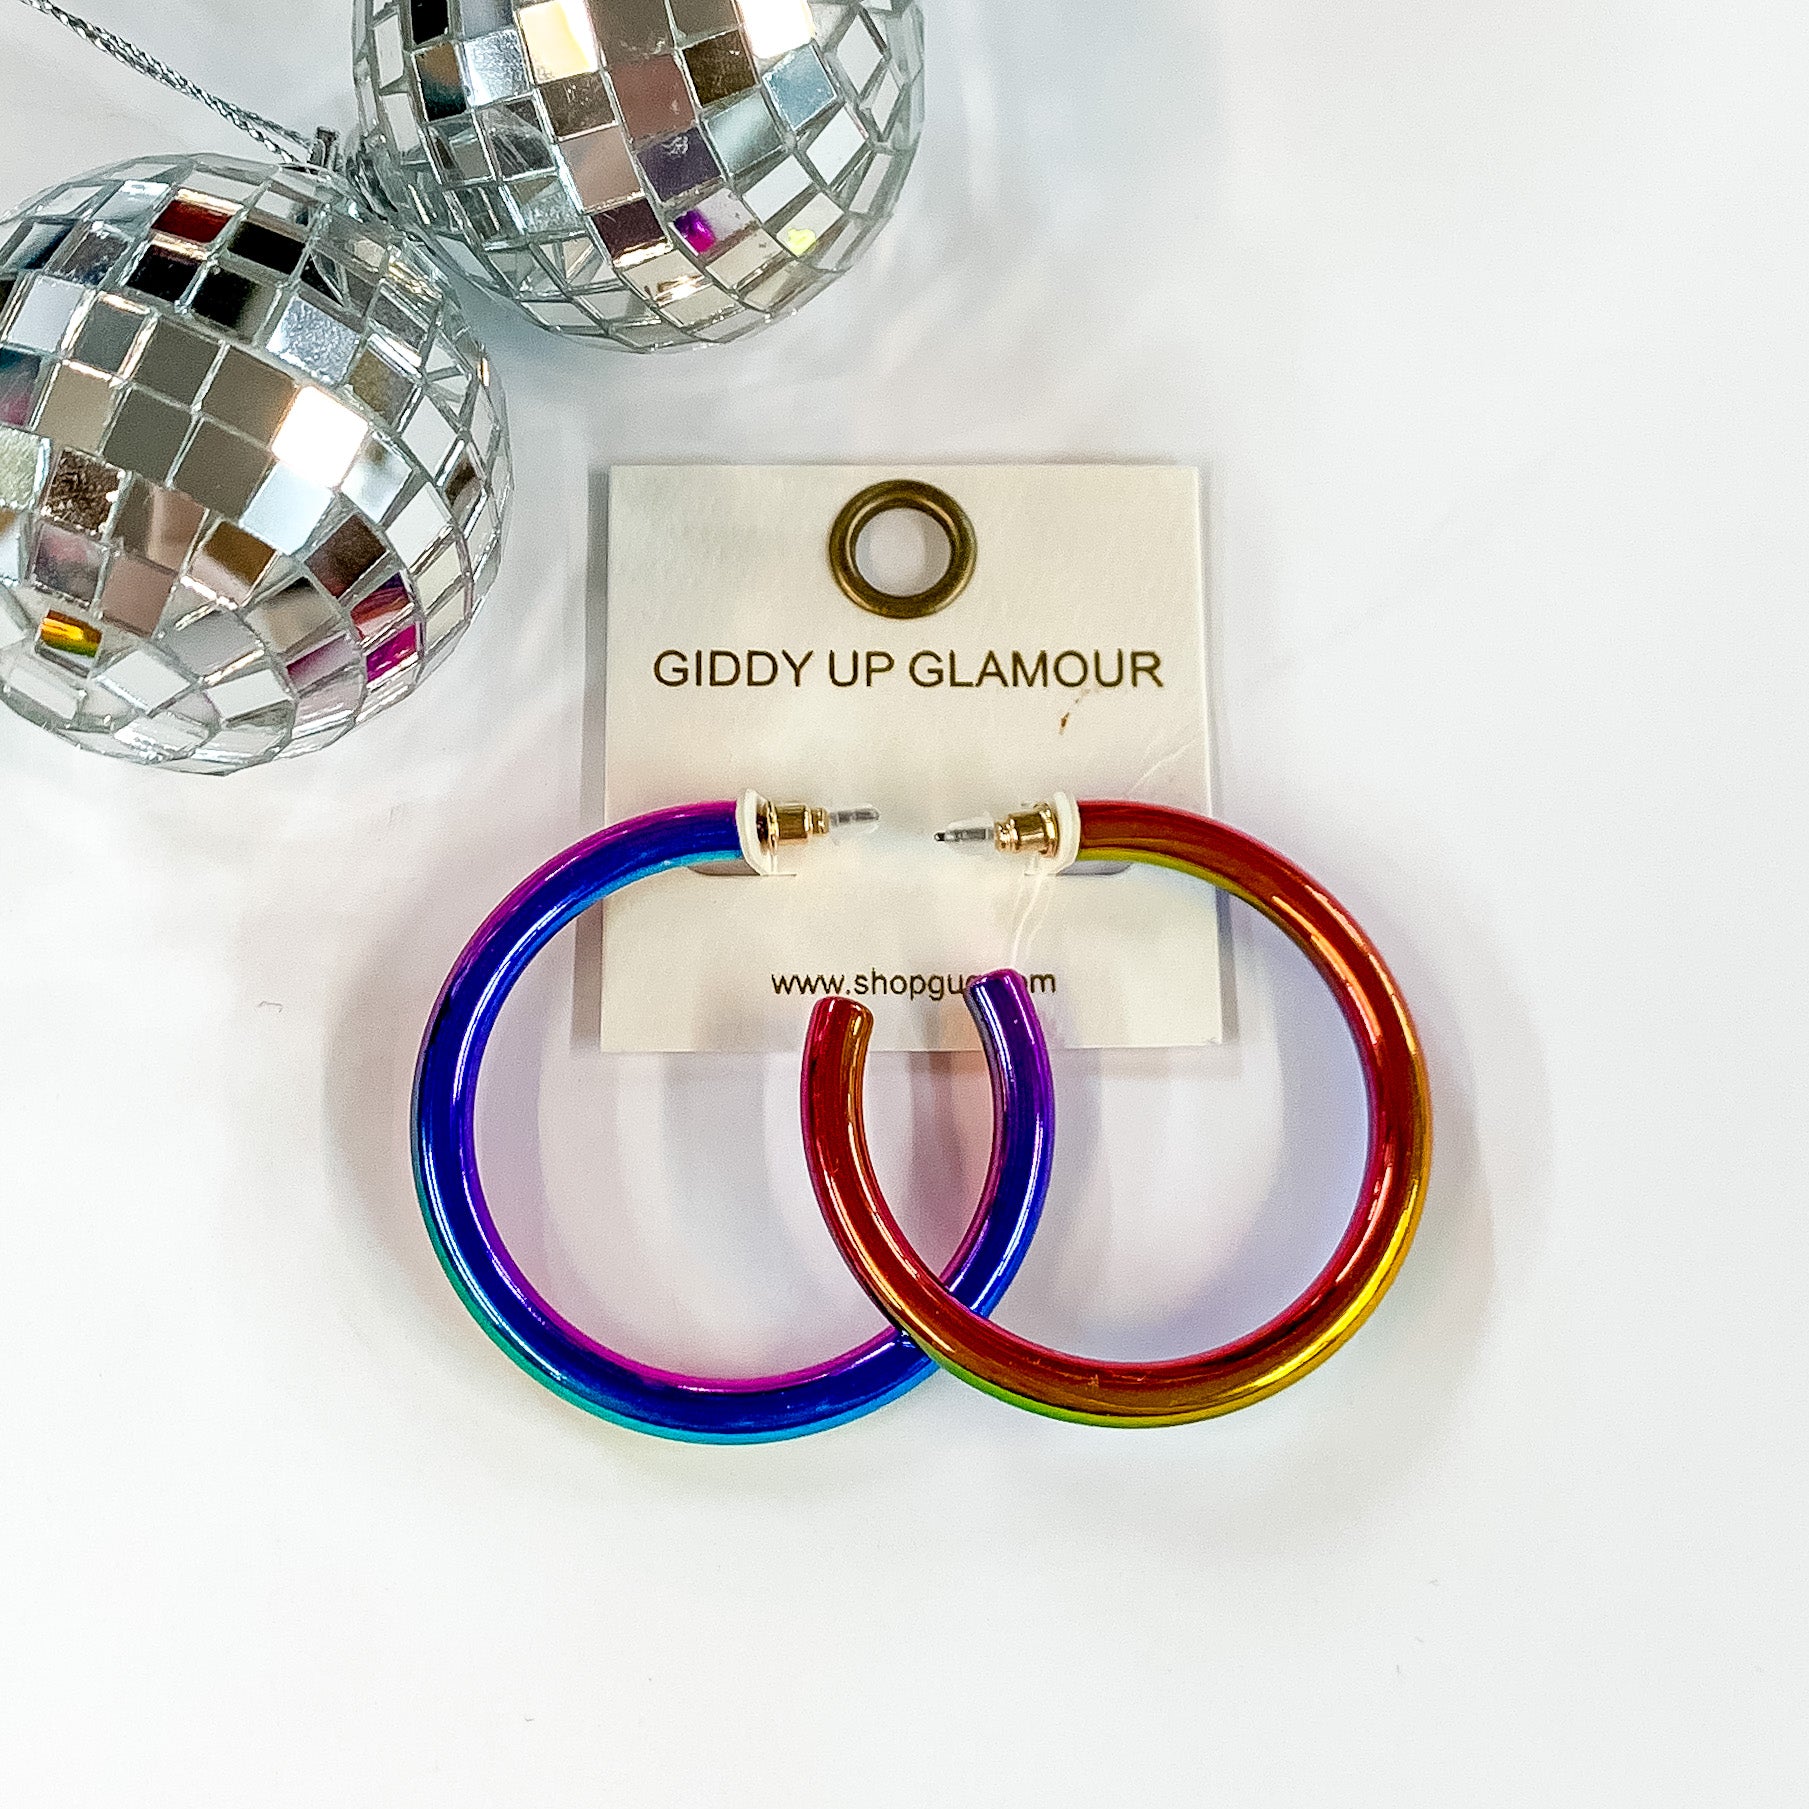 Light Up Large Neon Hoop Earrings In Multicolored. Pictured on a white background with disco balls in the top left corner.